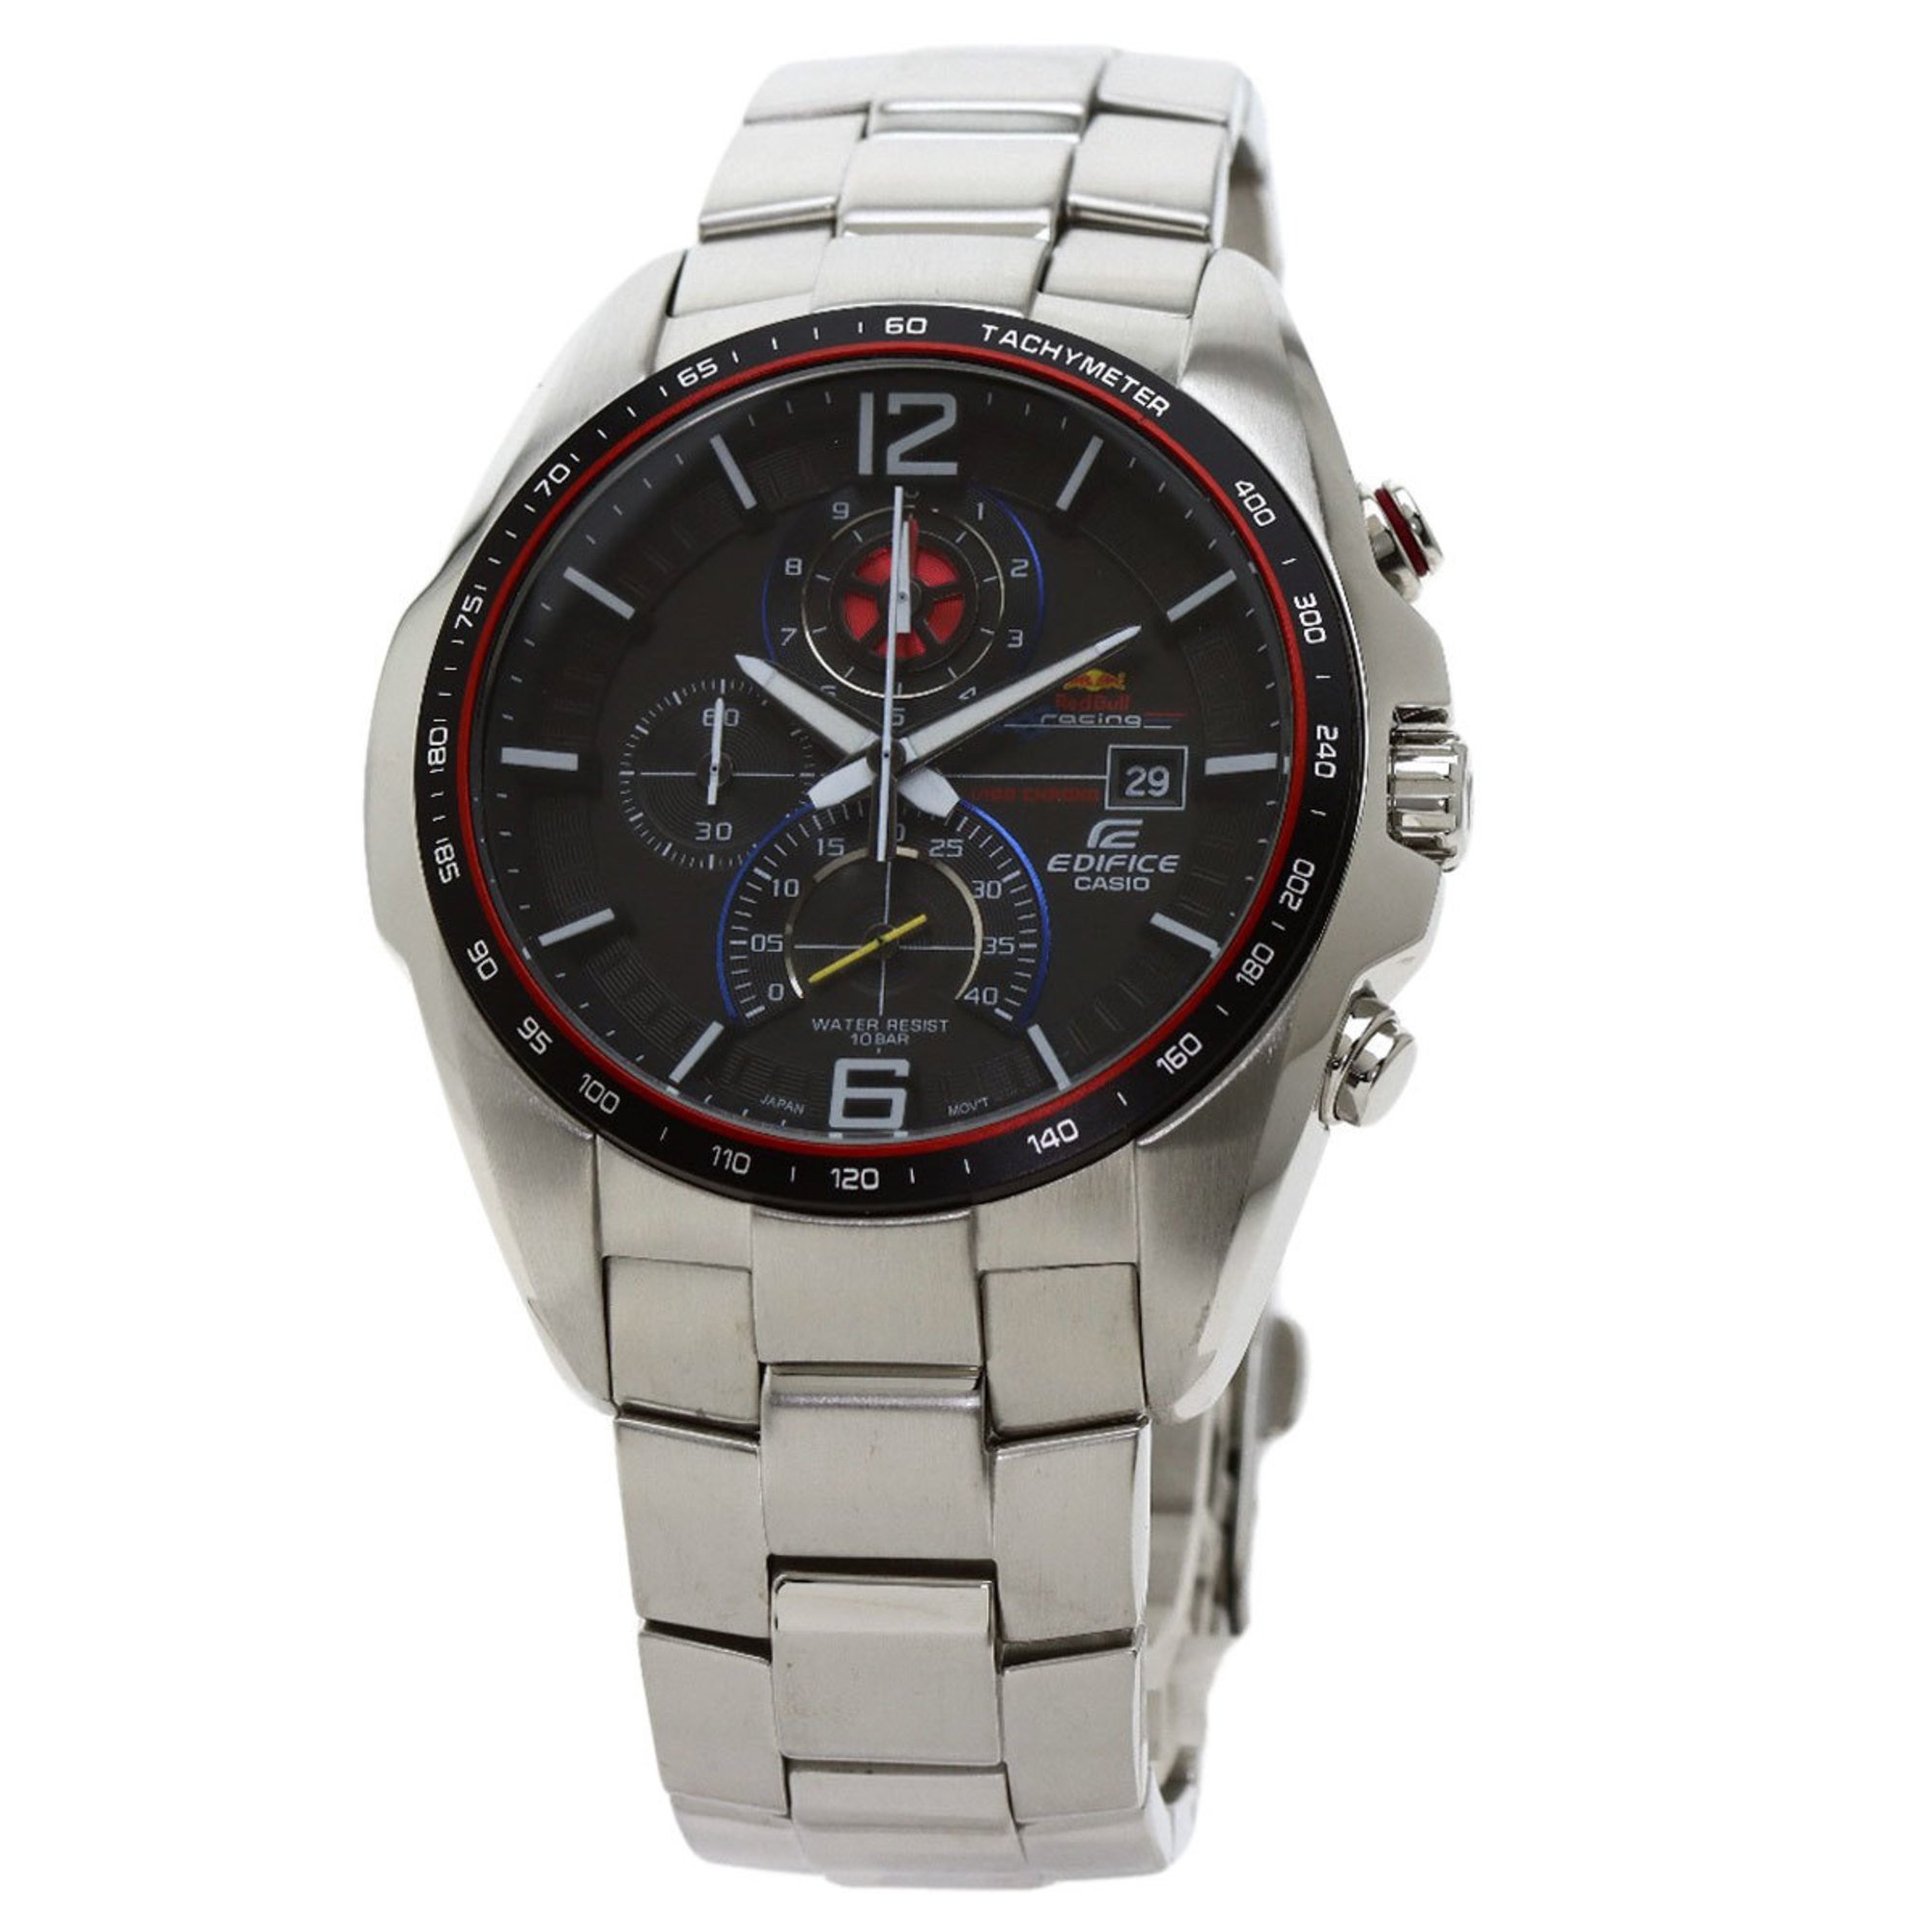 Casio EFR-528RB Red Bull Racing Limited Edition Watch Stainless Steel SS Men's